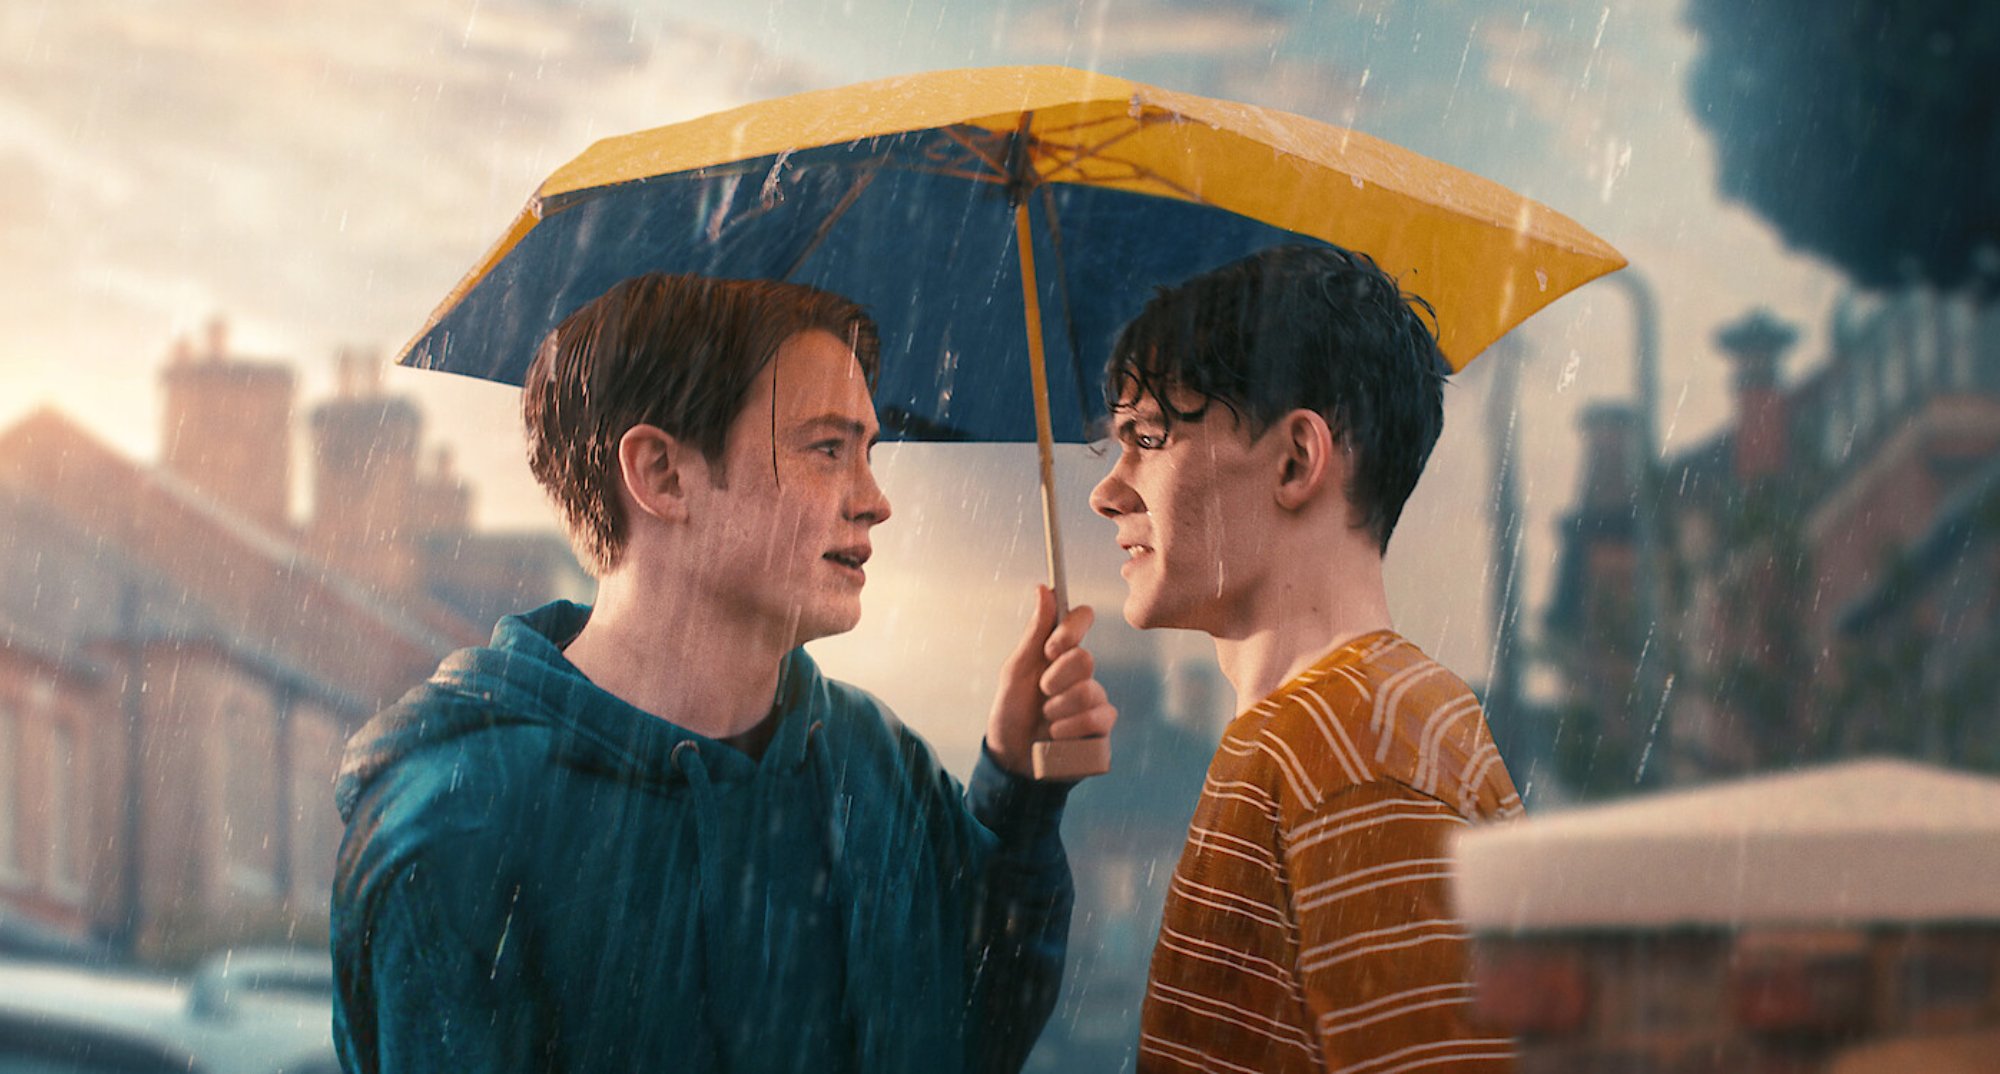 Kit Connor and Joe Locke in 'Heartstopper' in the rain with an umbrella.